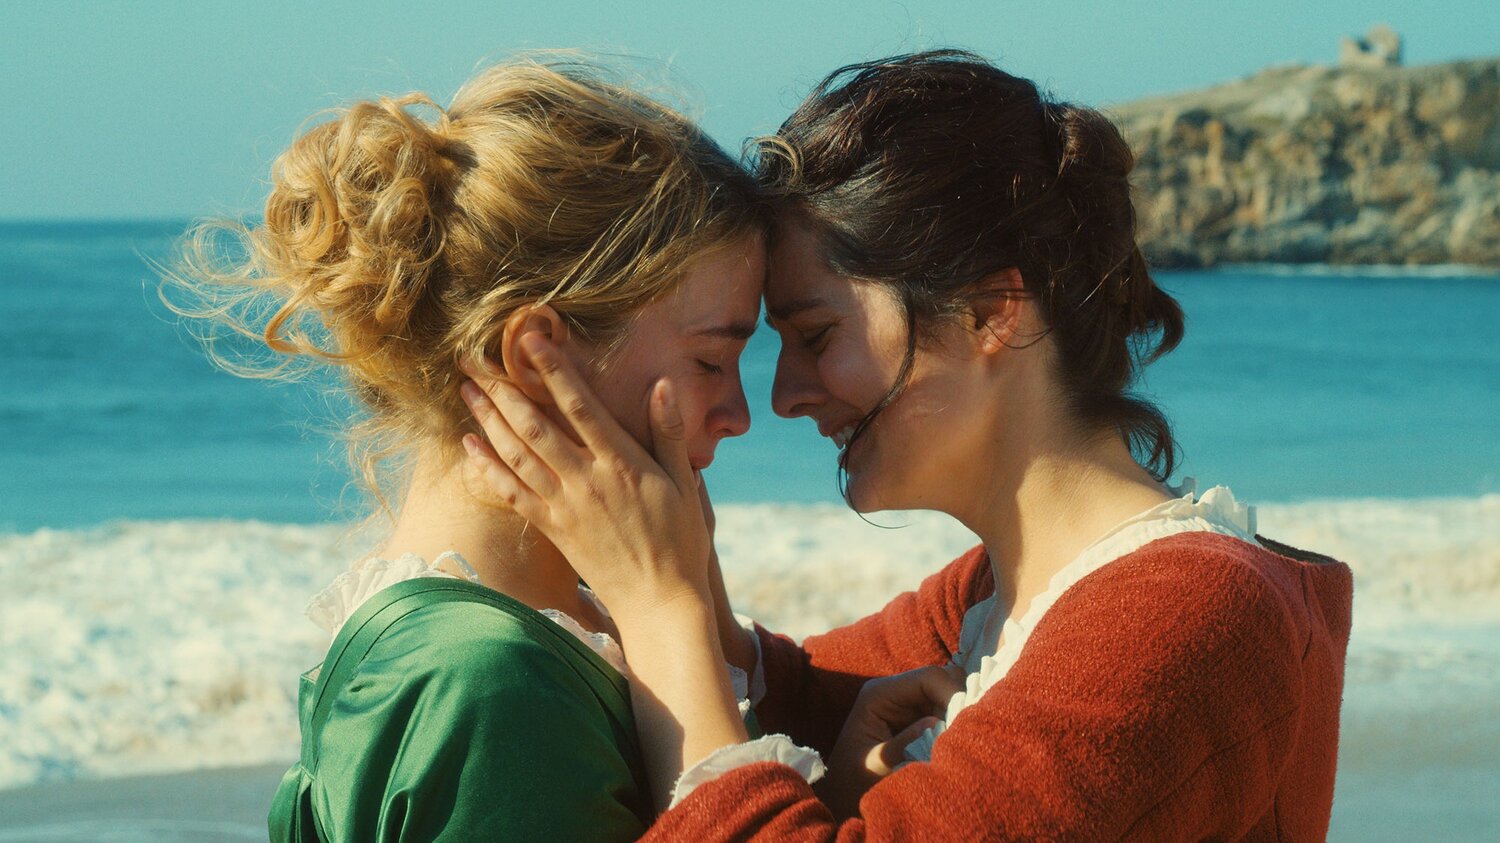 Heloise (Adèle Haenel) and Marianne (Noémie Merlant) share an intimate moment by the beach. Photo: NEON